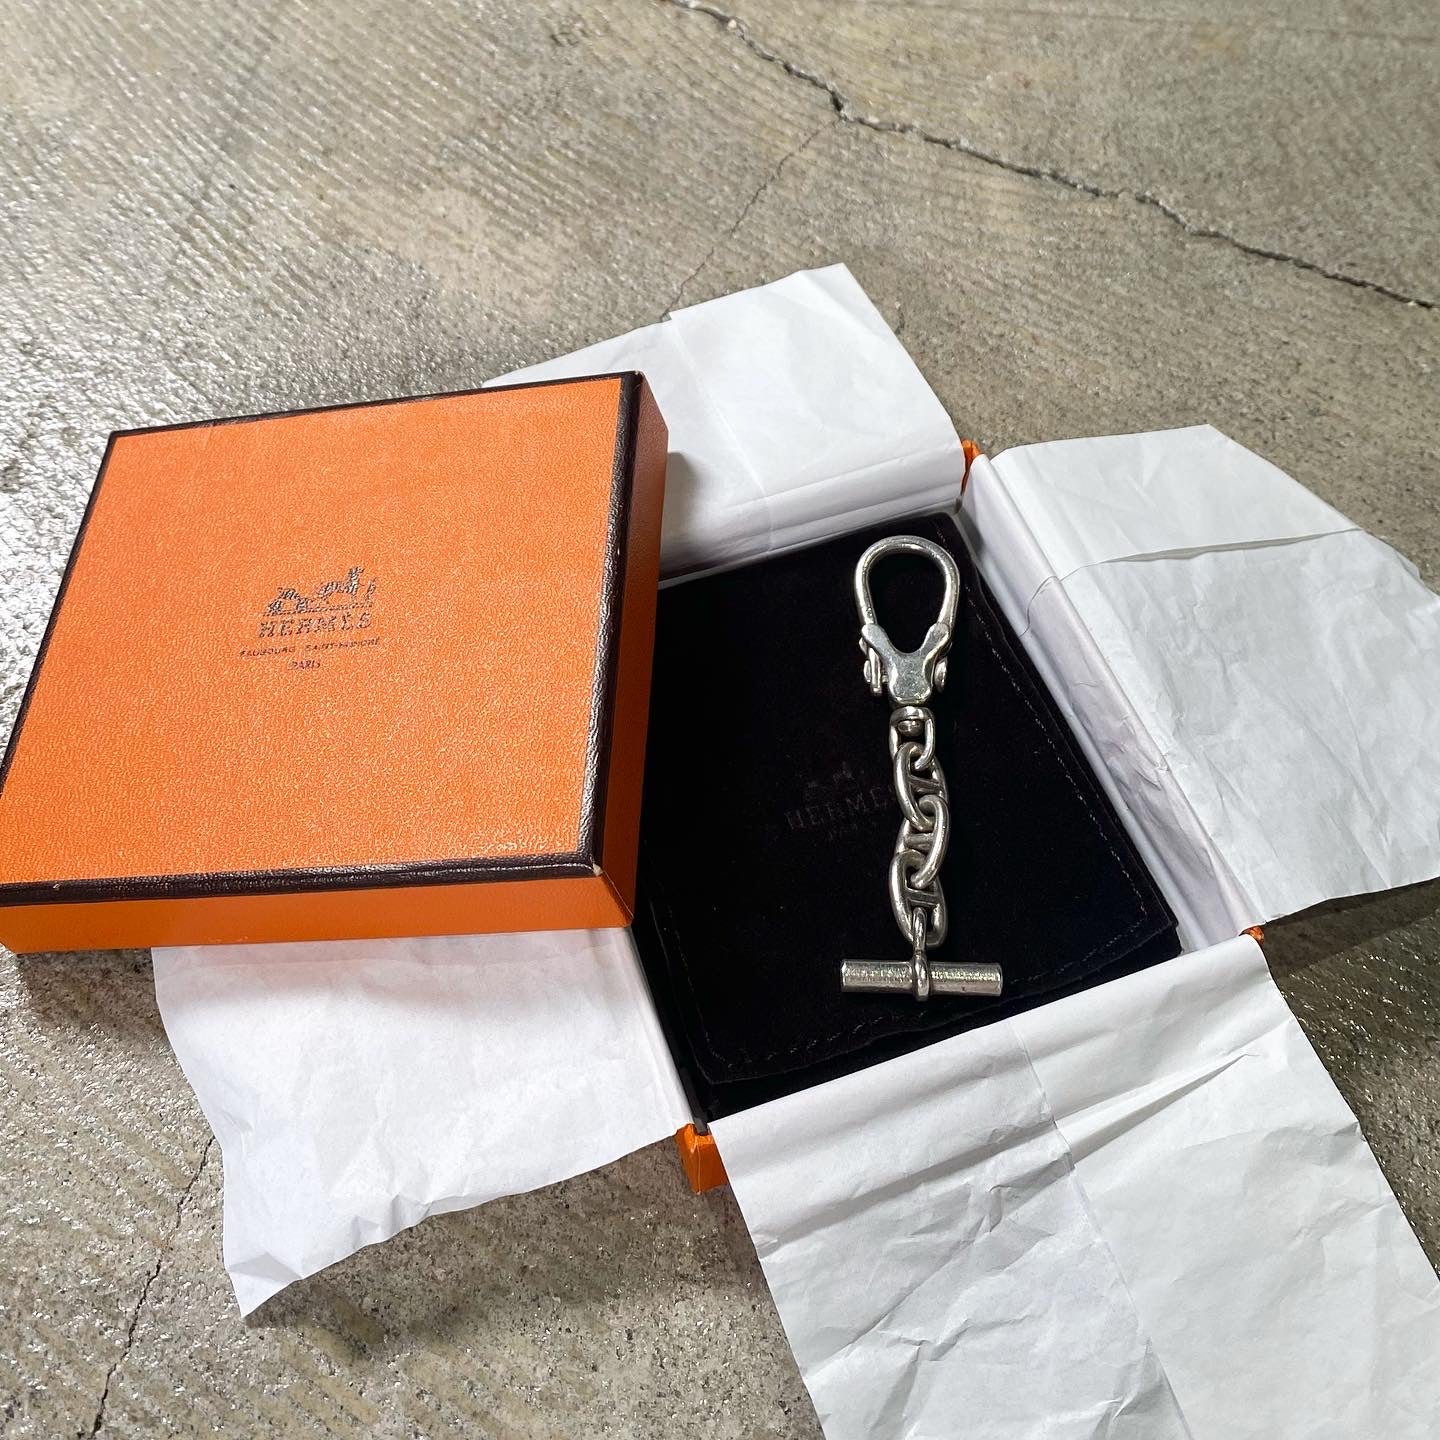 1980-90's HERMES Chaine d'Ancre Key Chain